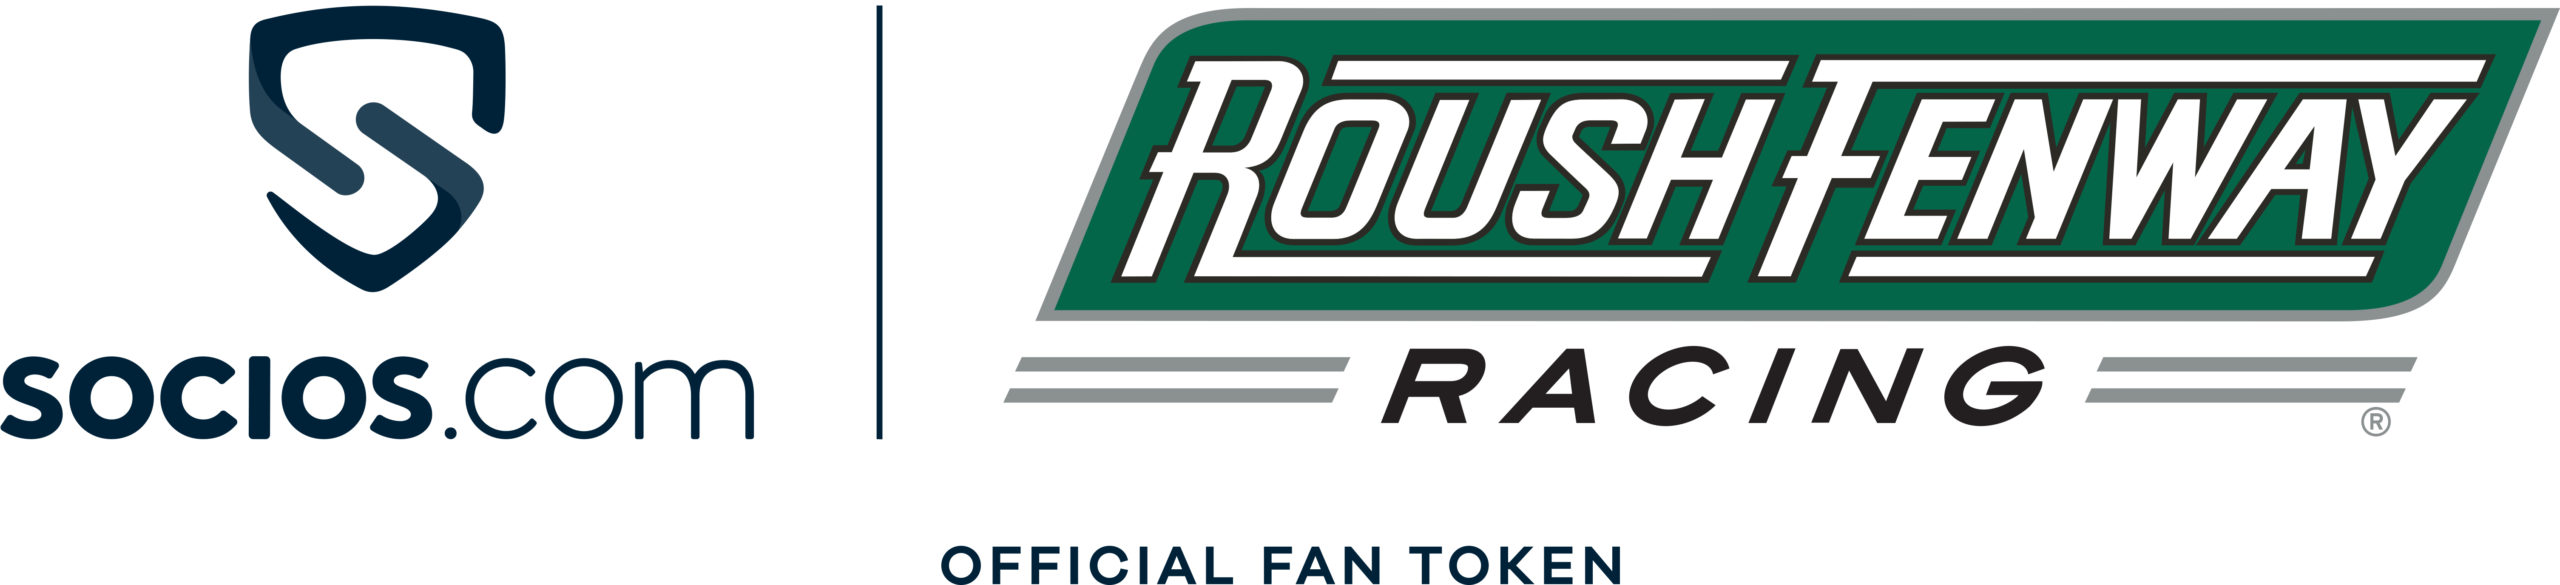 ROUSH FENWAY RACING TO BECOME FIRST US SPORTS TEAM TO LAUNCH FAN TOKEN ON SOCIOS.COM